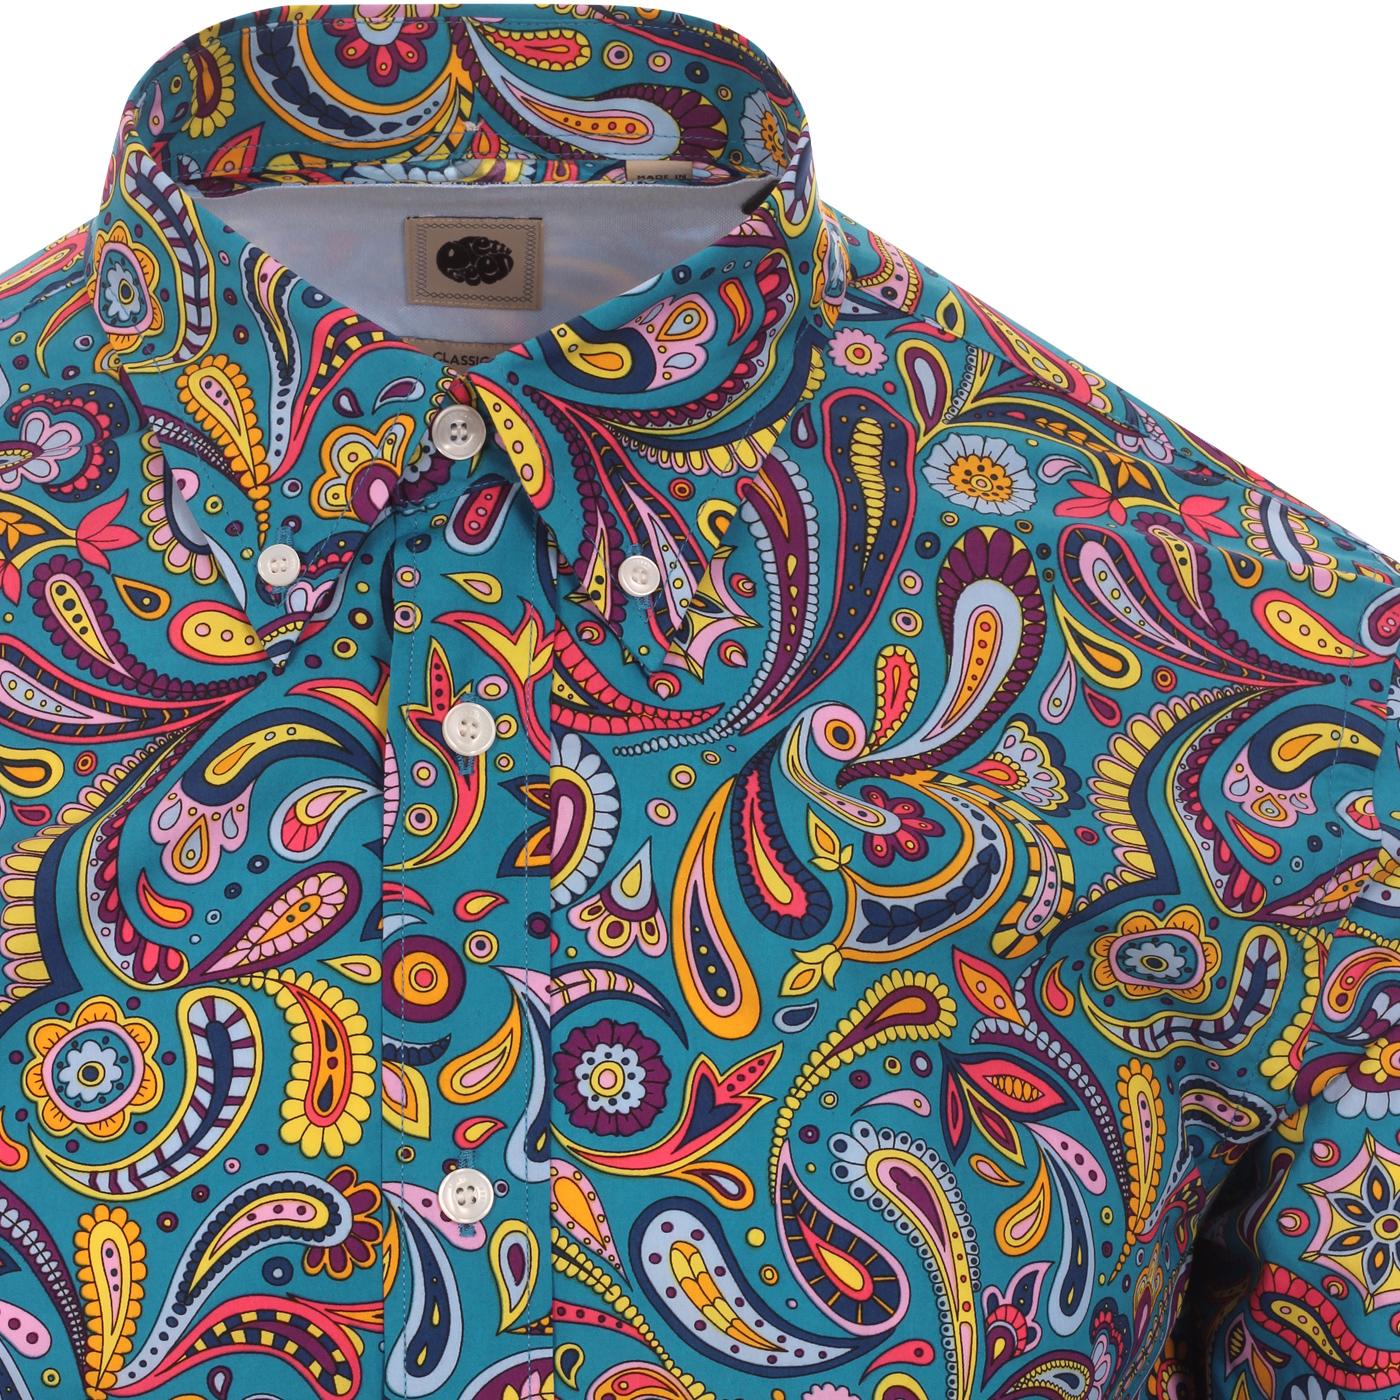 PRETTY GREEN 60s Mod Psychedelic Paisley BD Shirt in Blue